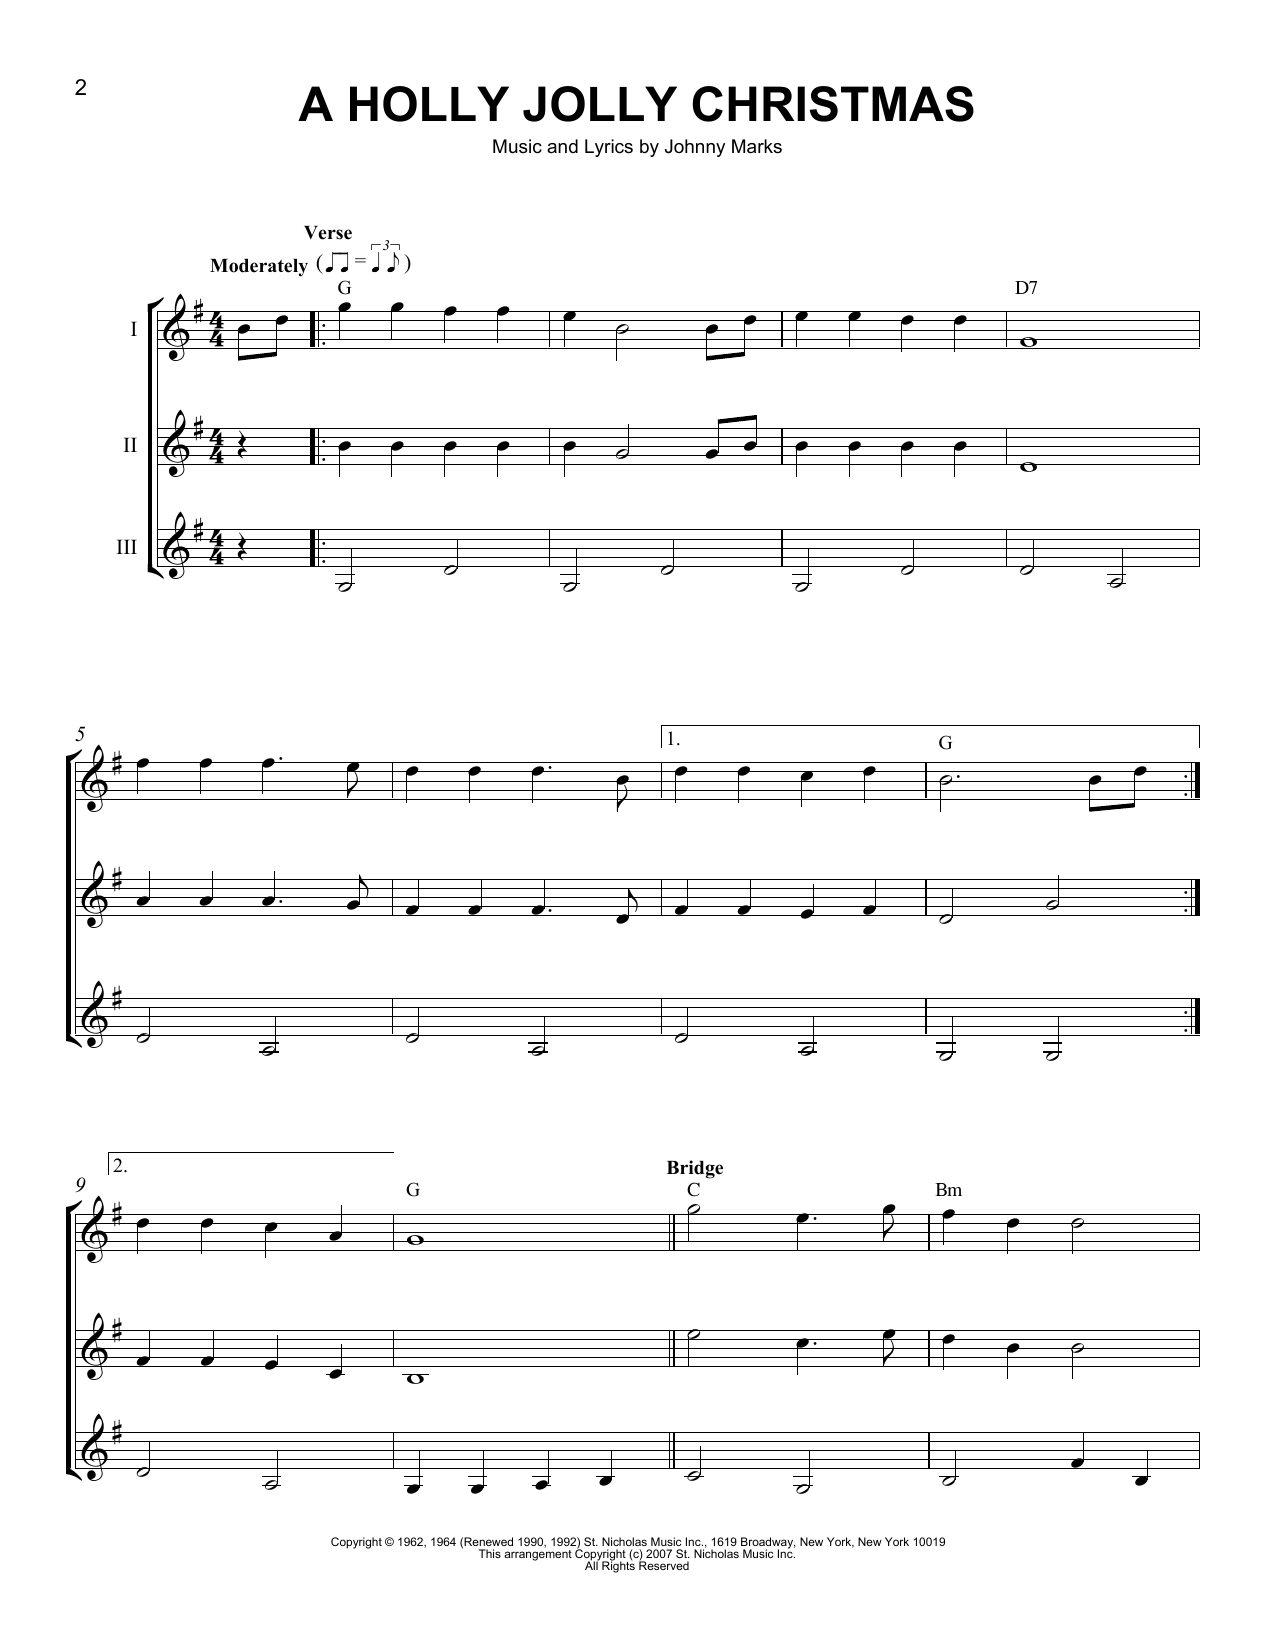 Download J Arnold A Holly Jolly Christmas Sheet Music